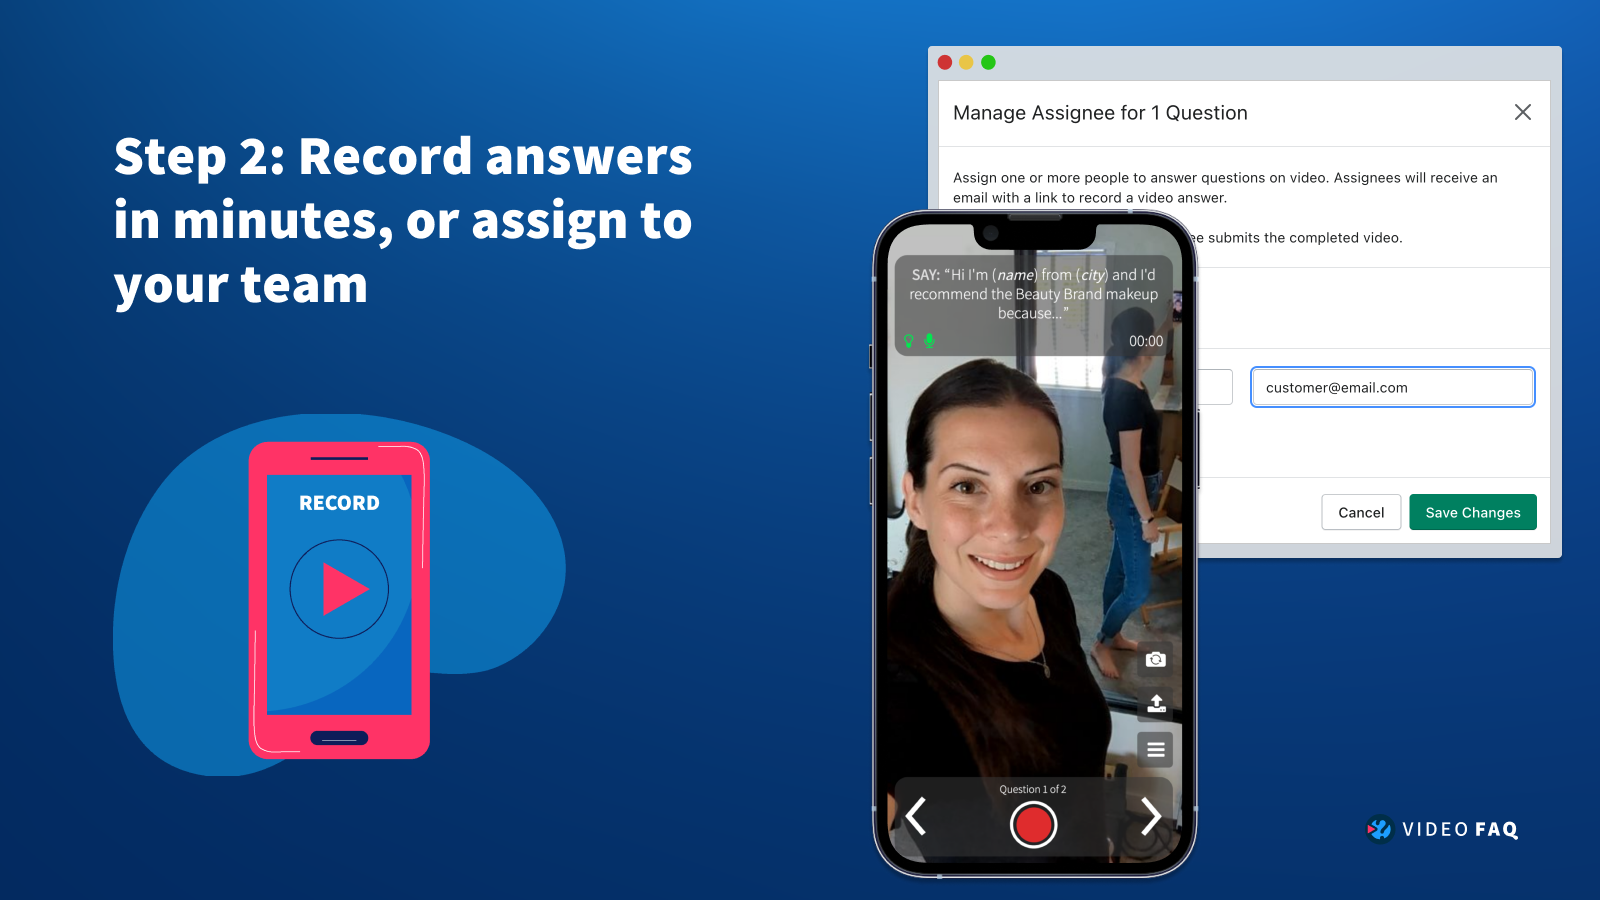 Step 2: Record answers in minutes, or assign to your team